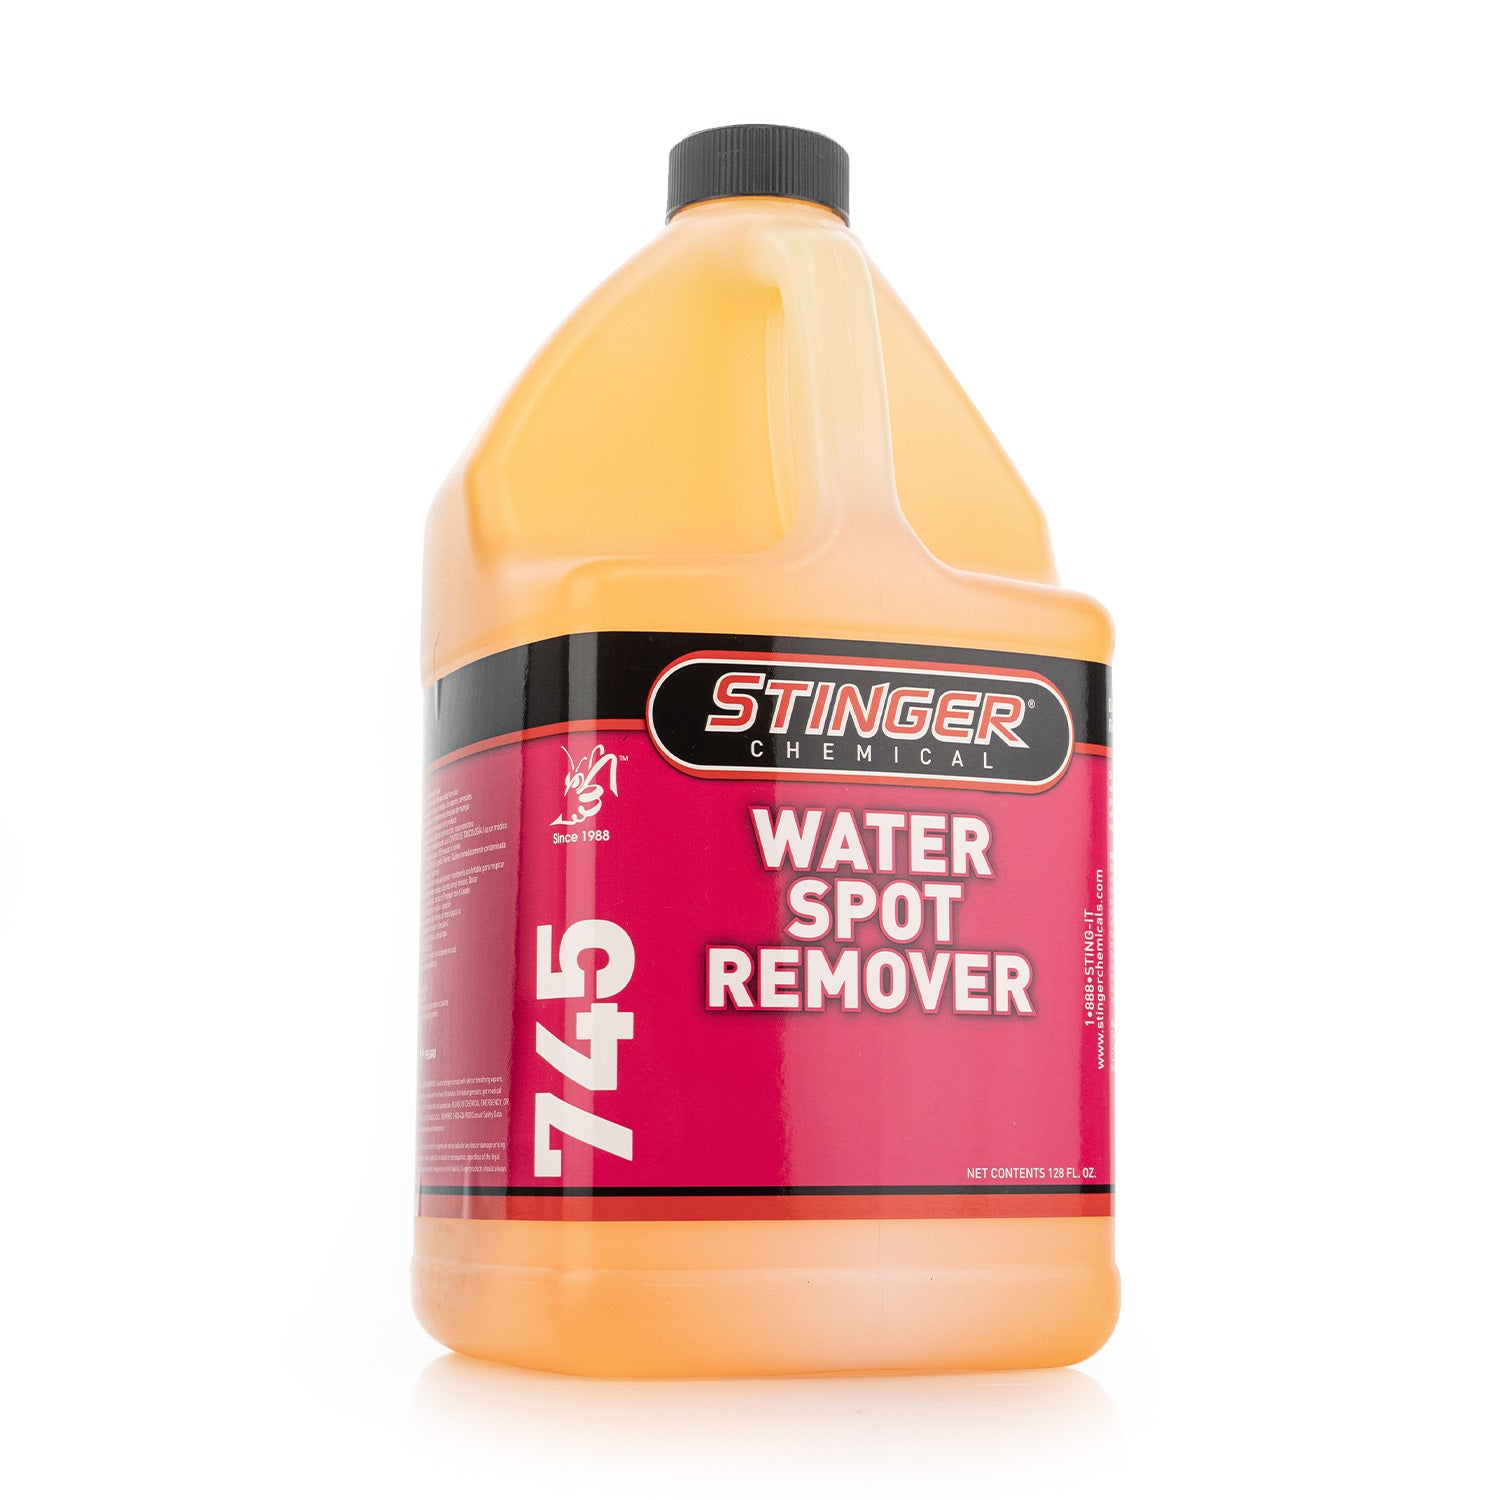 Stinger Chemical Water Spot Remover